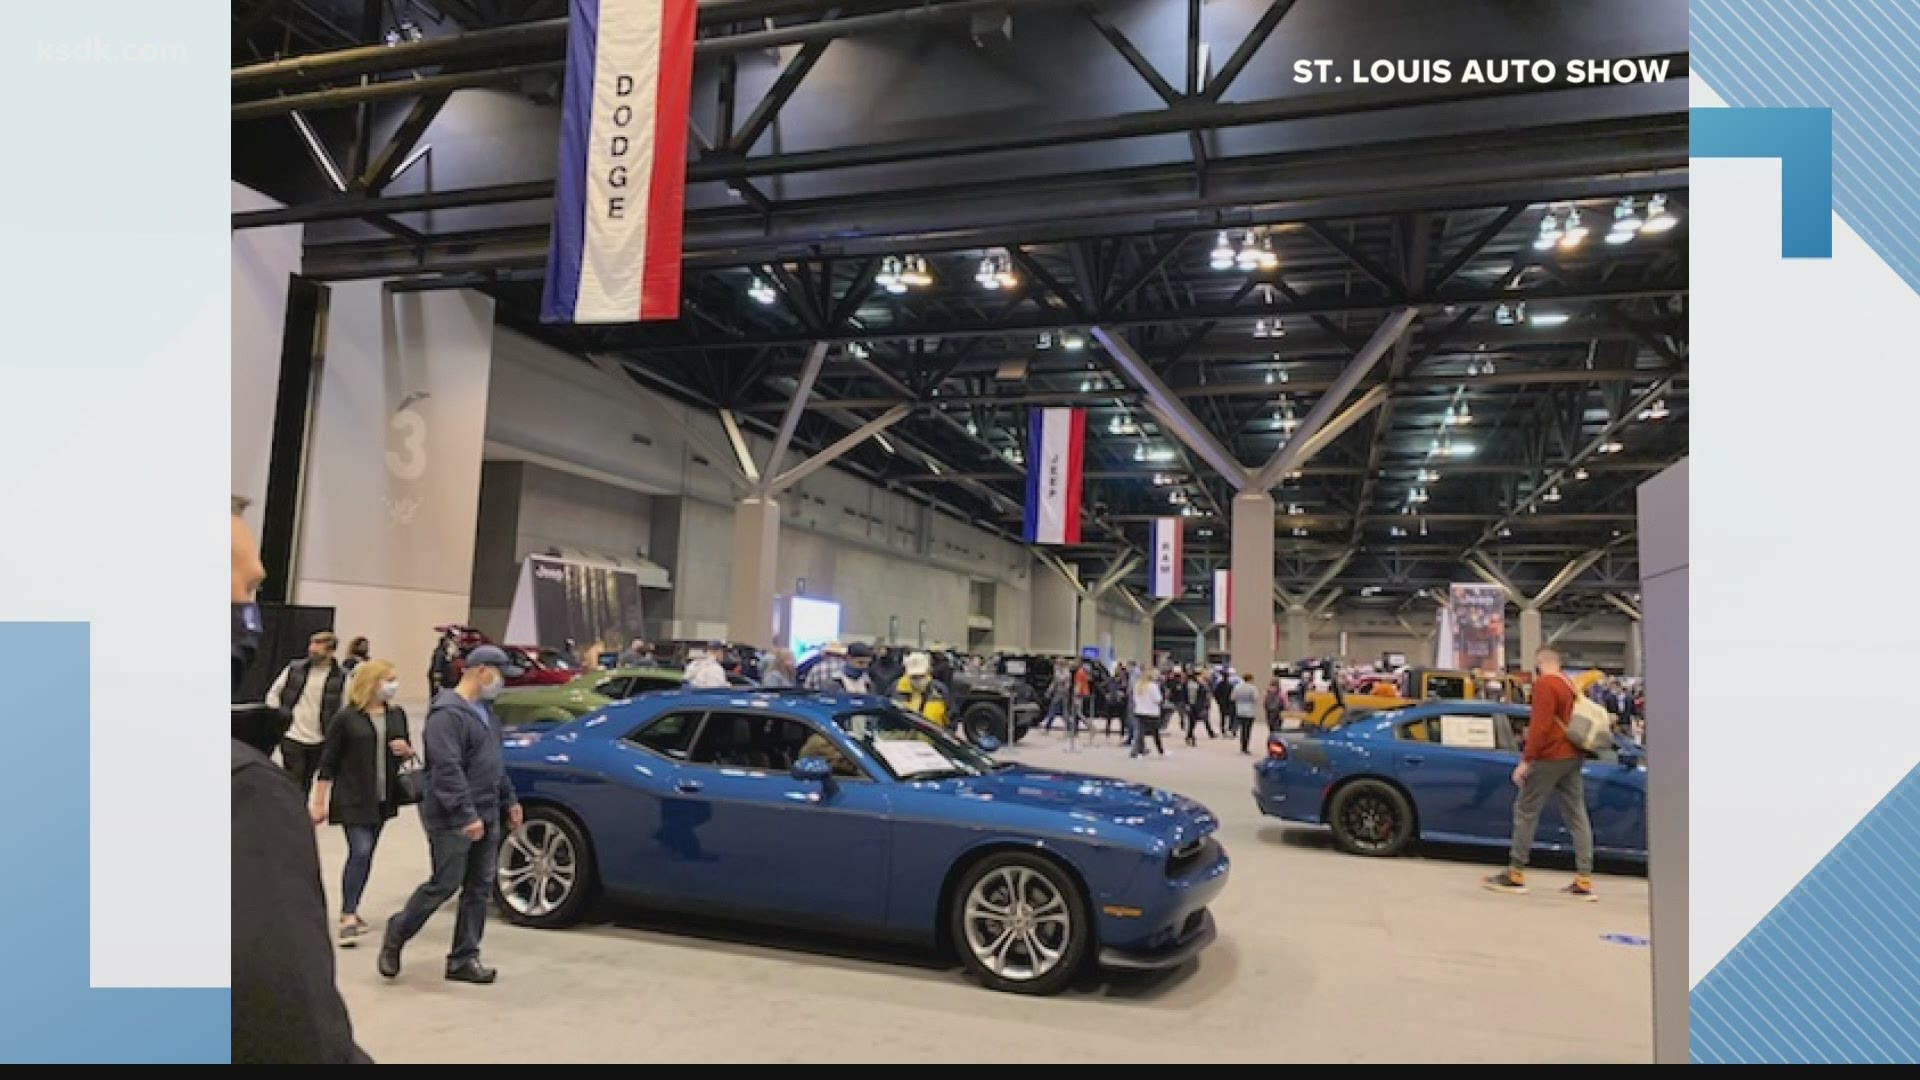 Marathon and car show among signs that city is closer to sense of normalcy